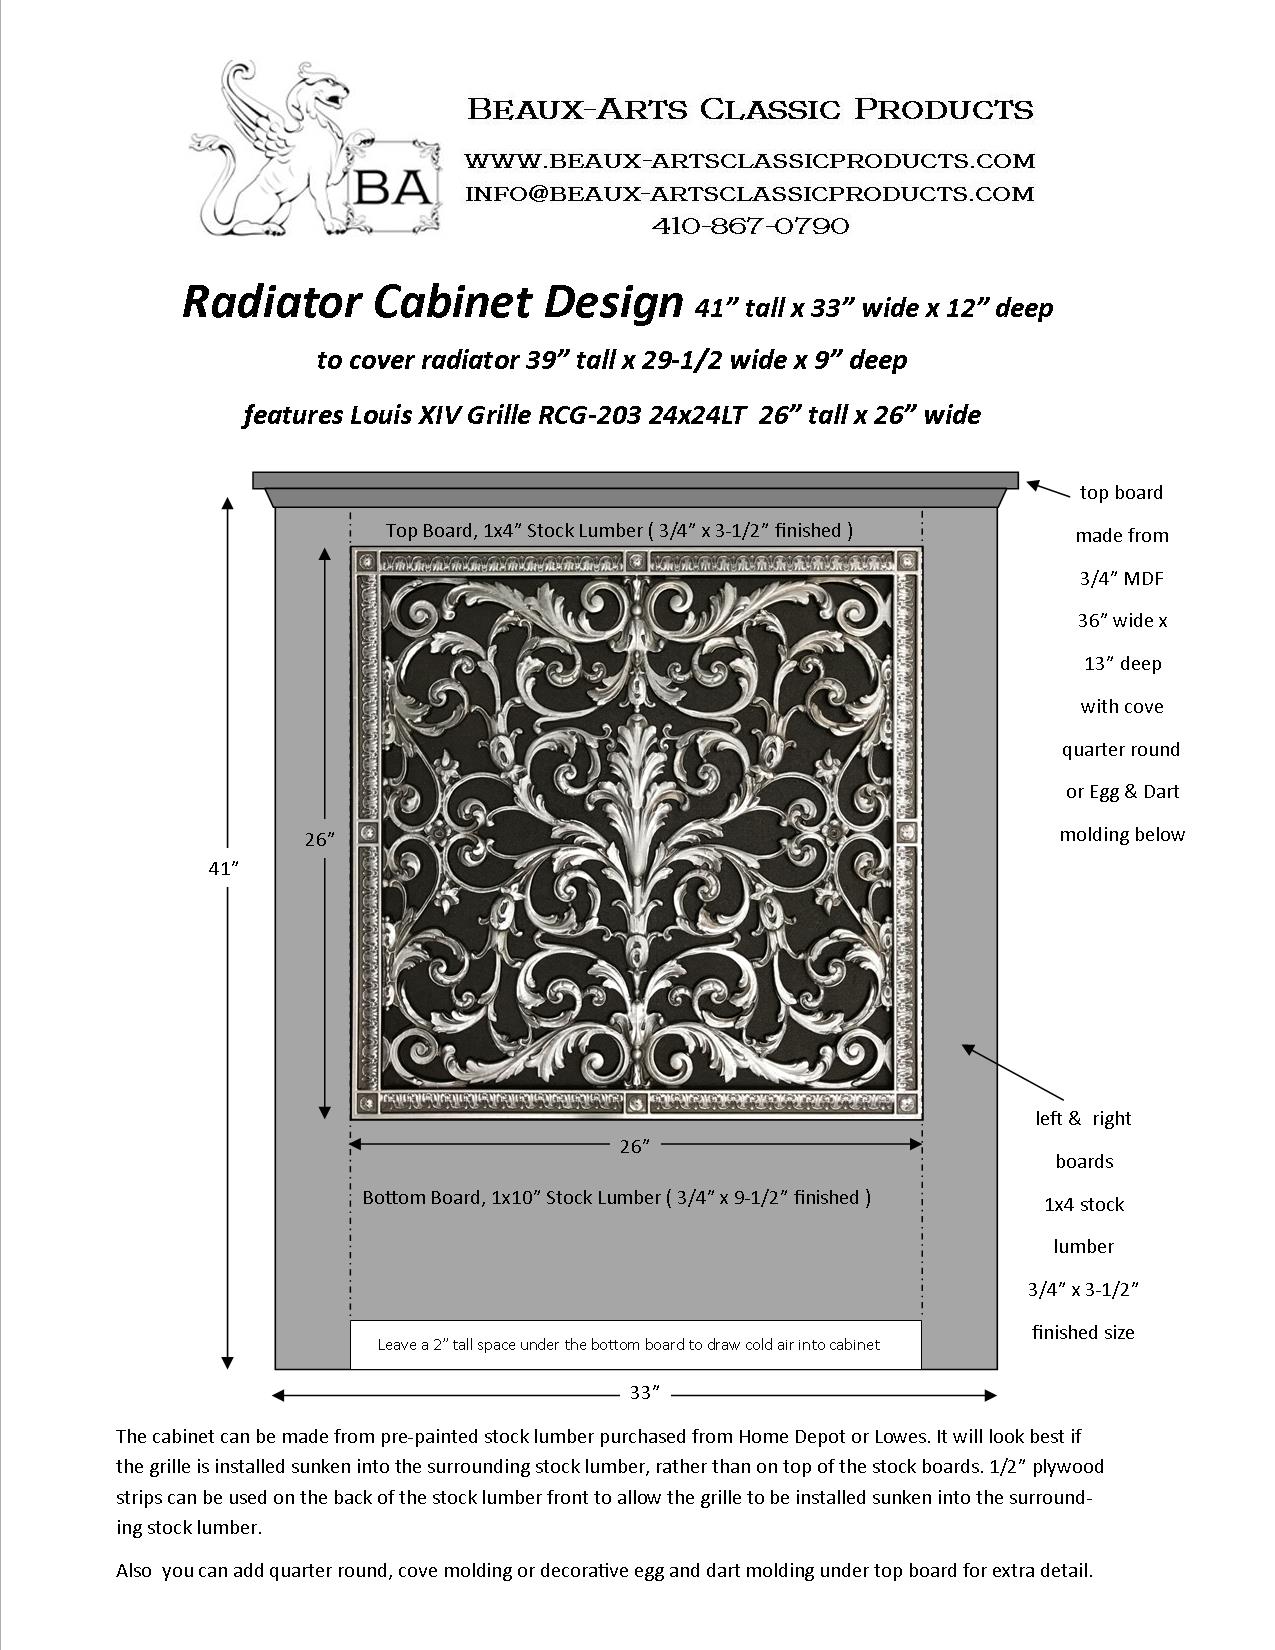 Radiator Cover Design with a 24" x 24" decorative radiator cover grille.